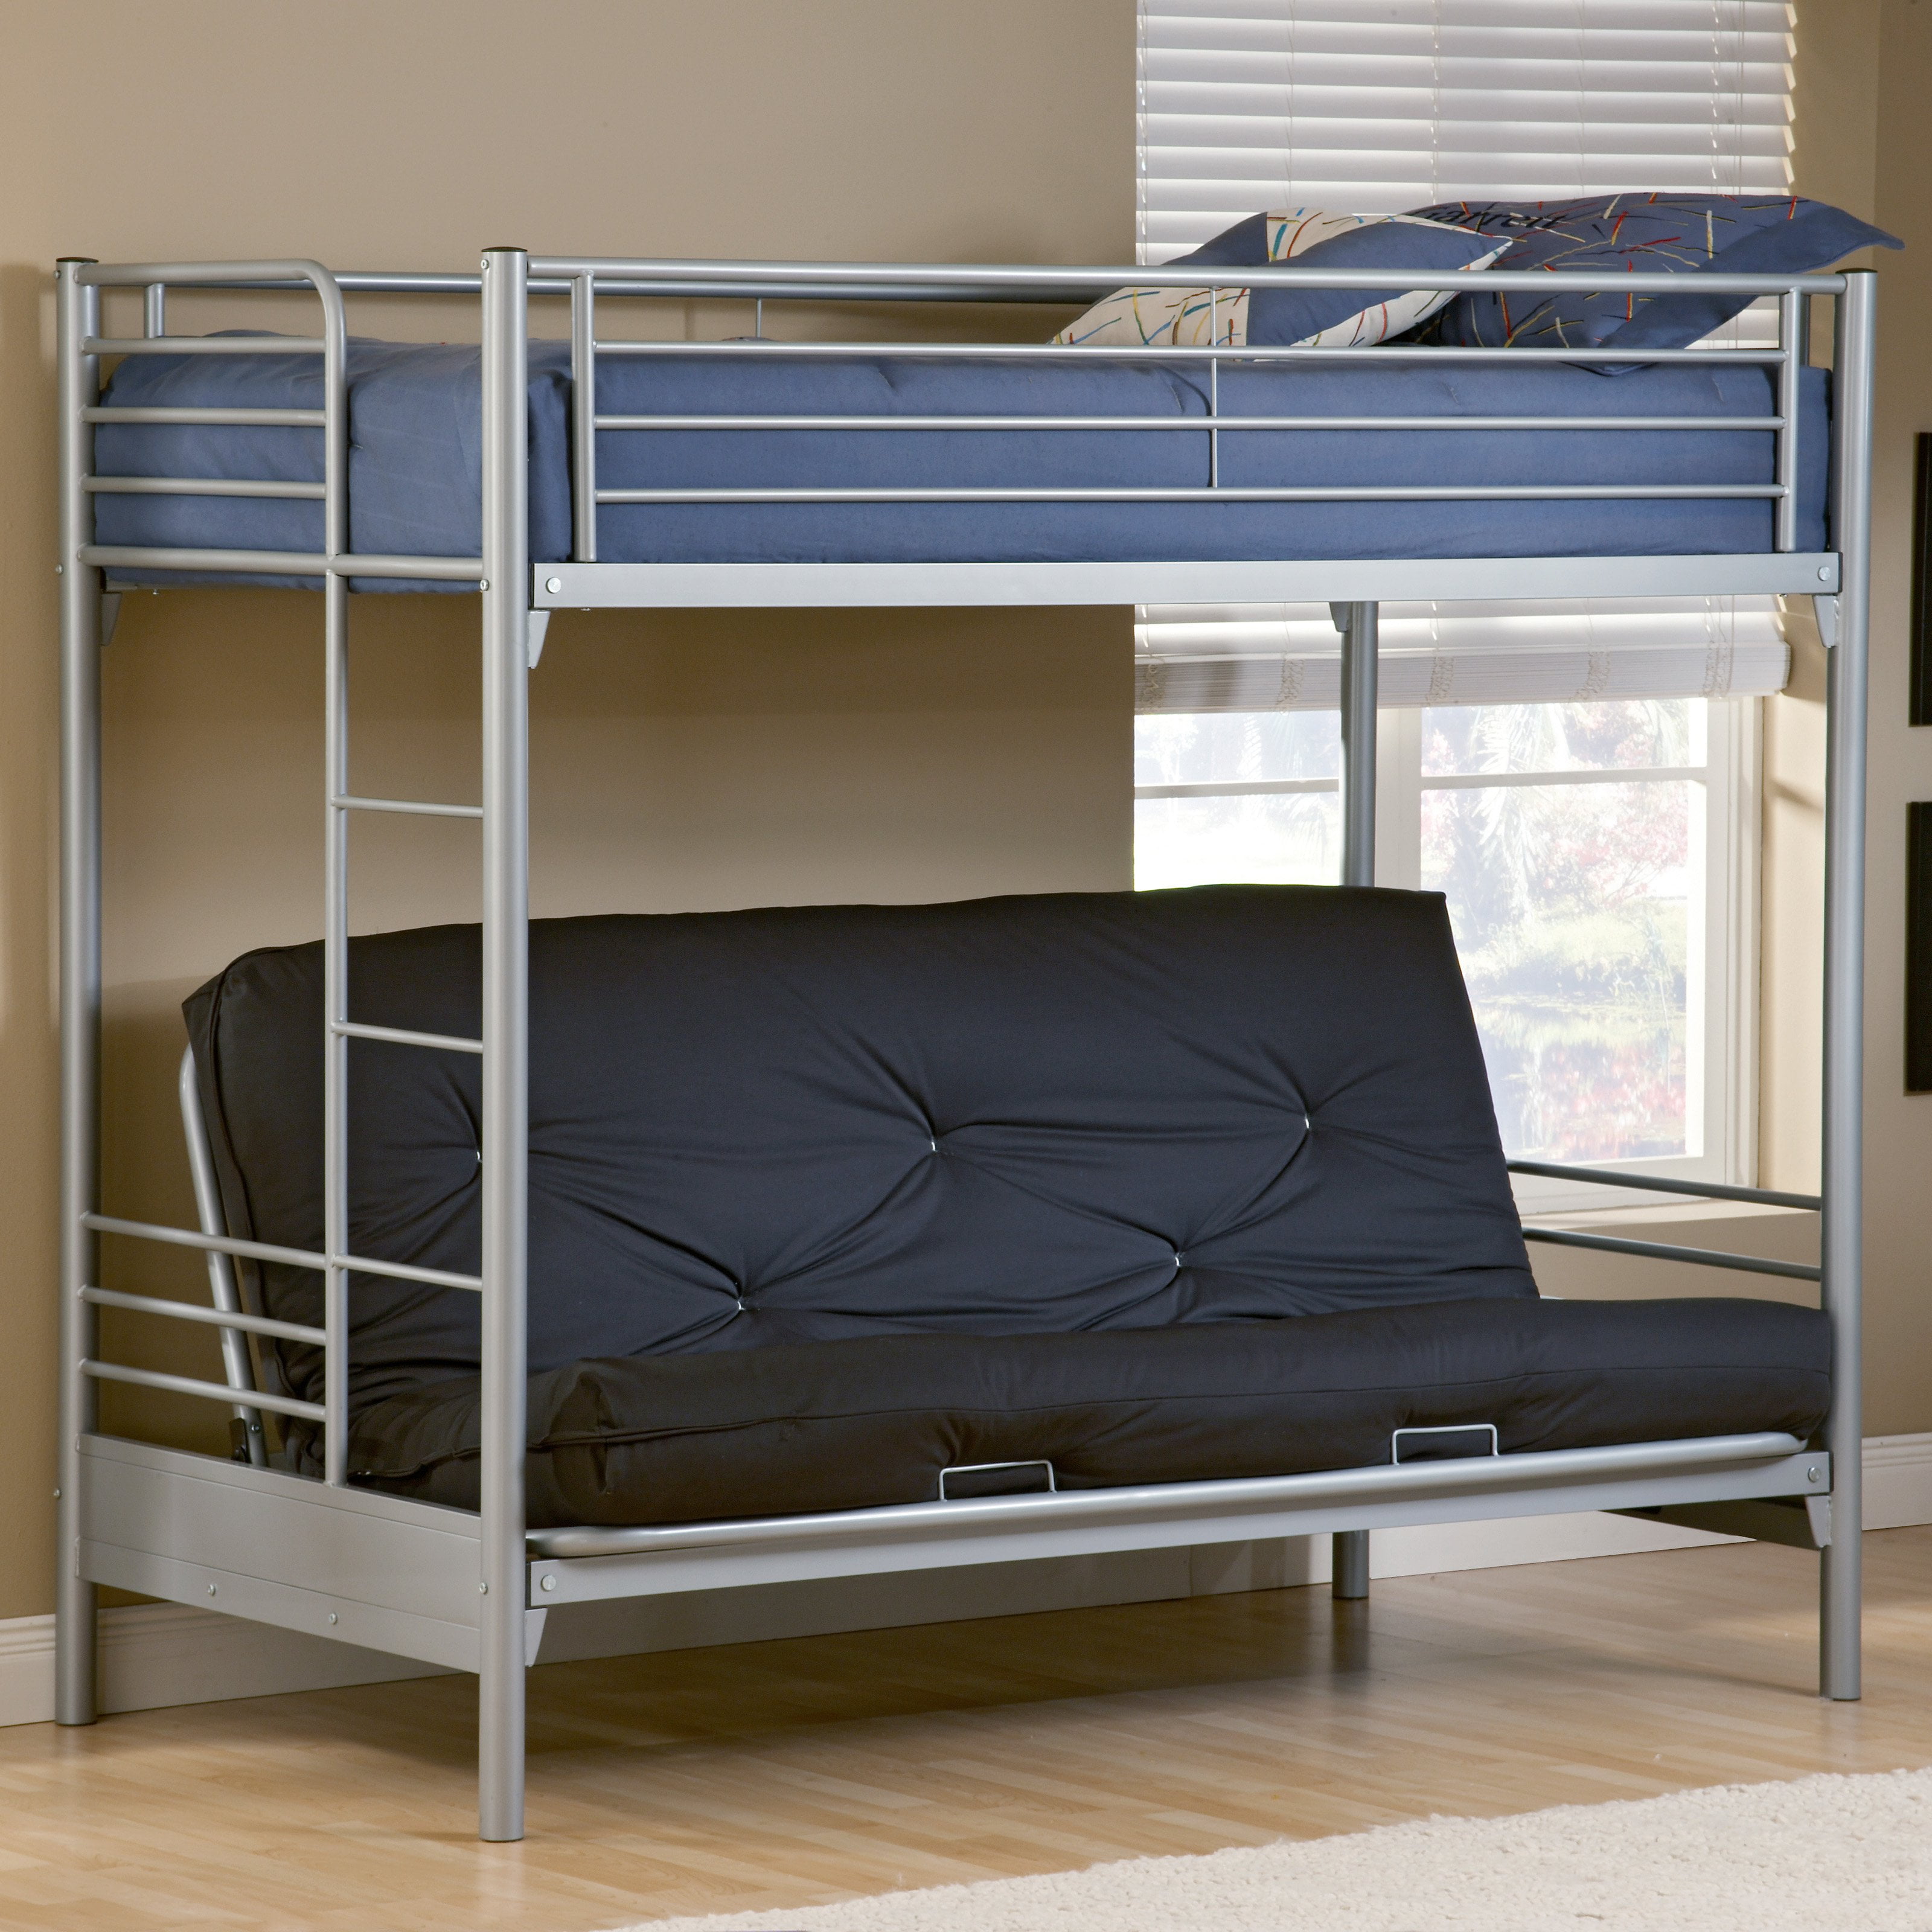 Universal Twin Over Futon Bunk Bed, Nfl Bunk Bed Futon